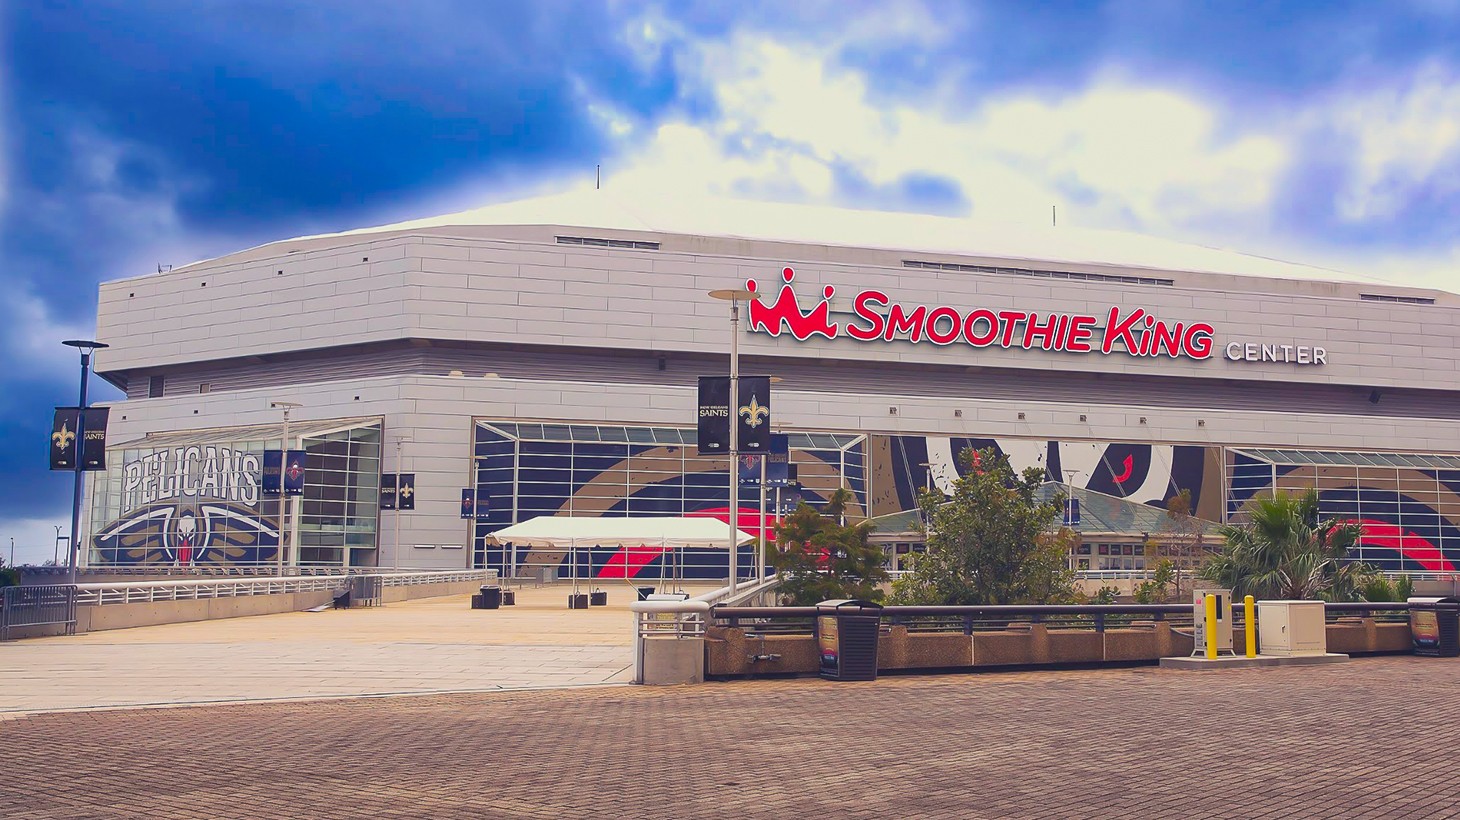 Smoothie King Center: New Orleans arena guide